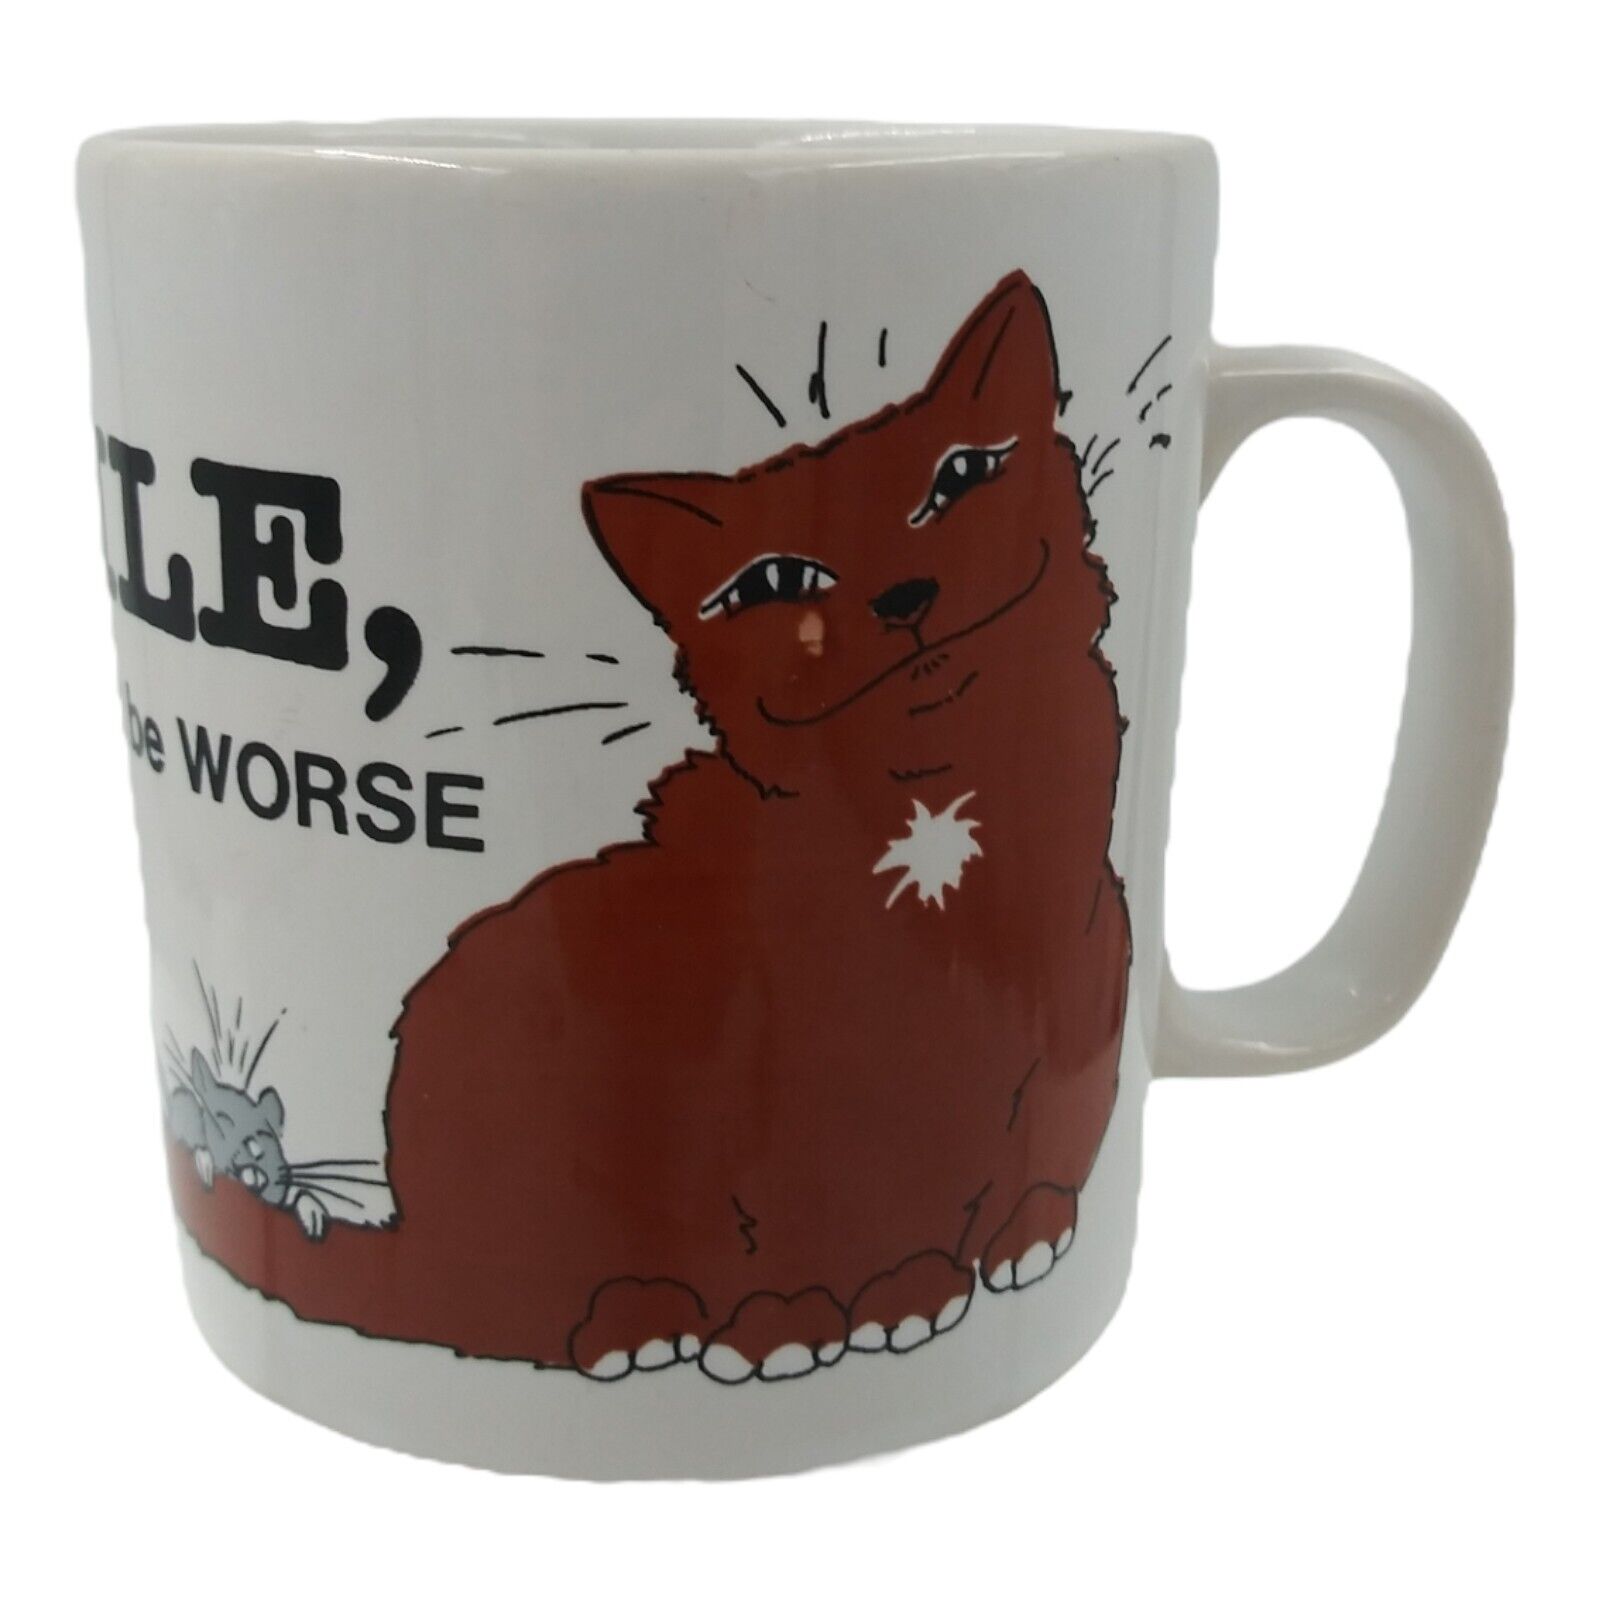 Vintage Cat Mouse Mug Cup Made in England Relax It Could Be Worse